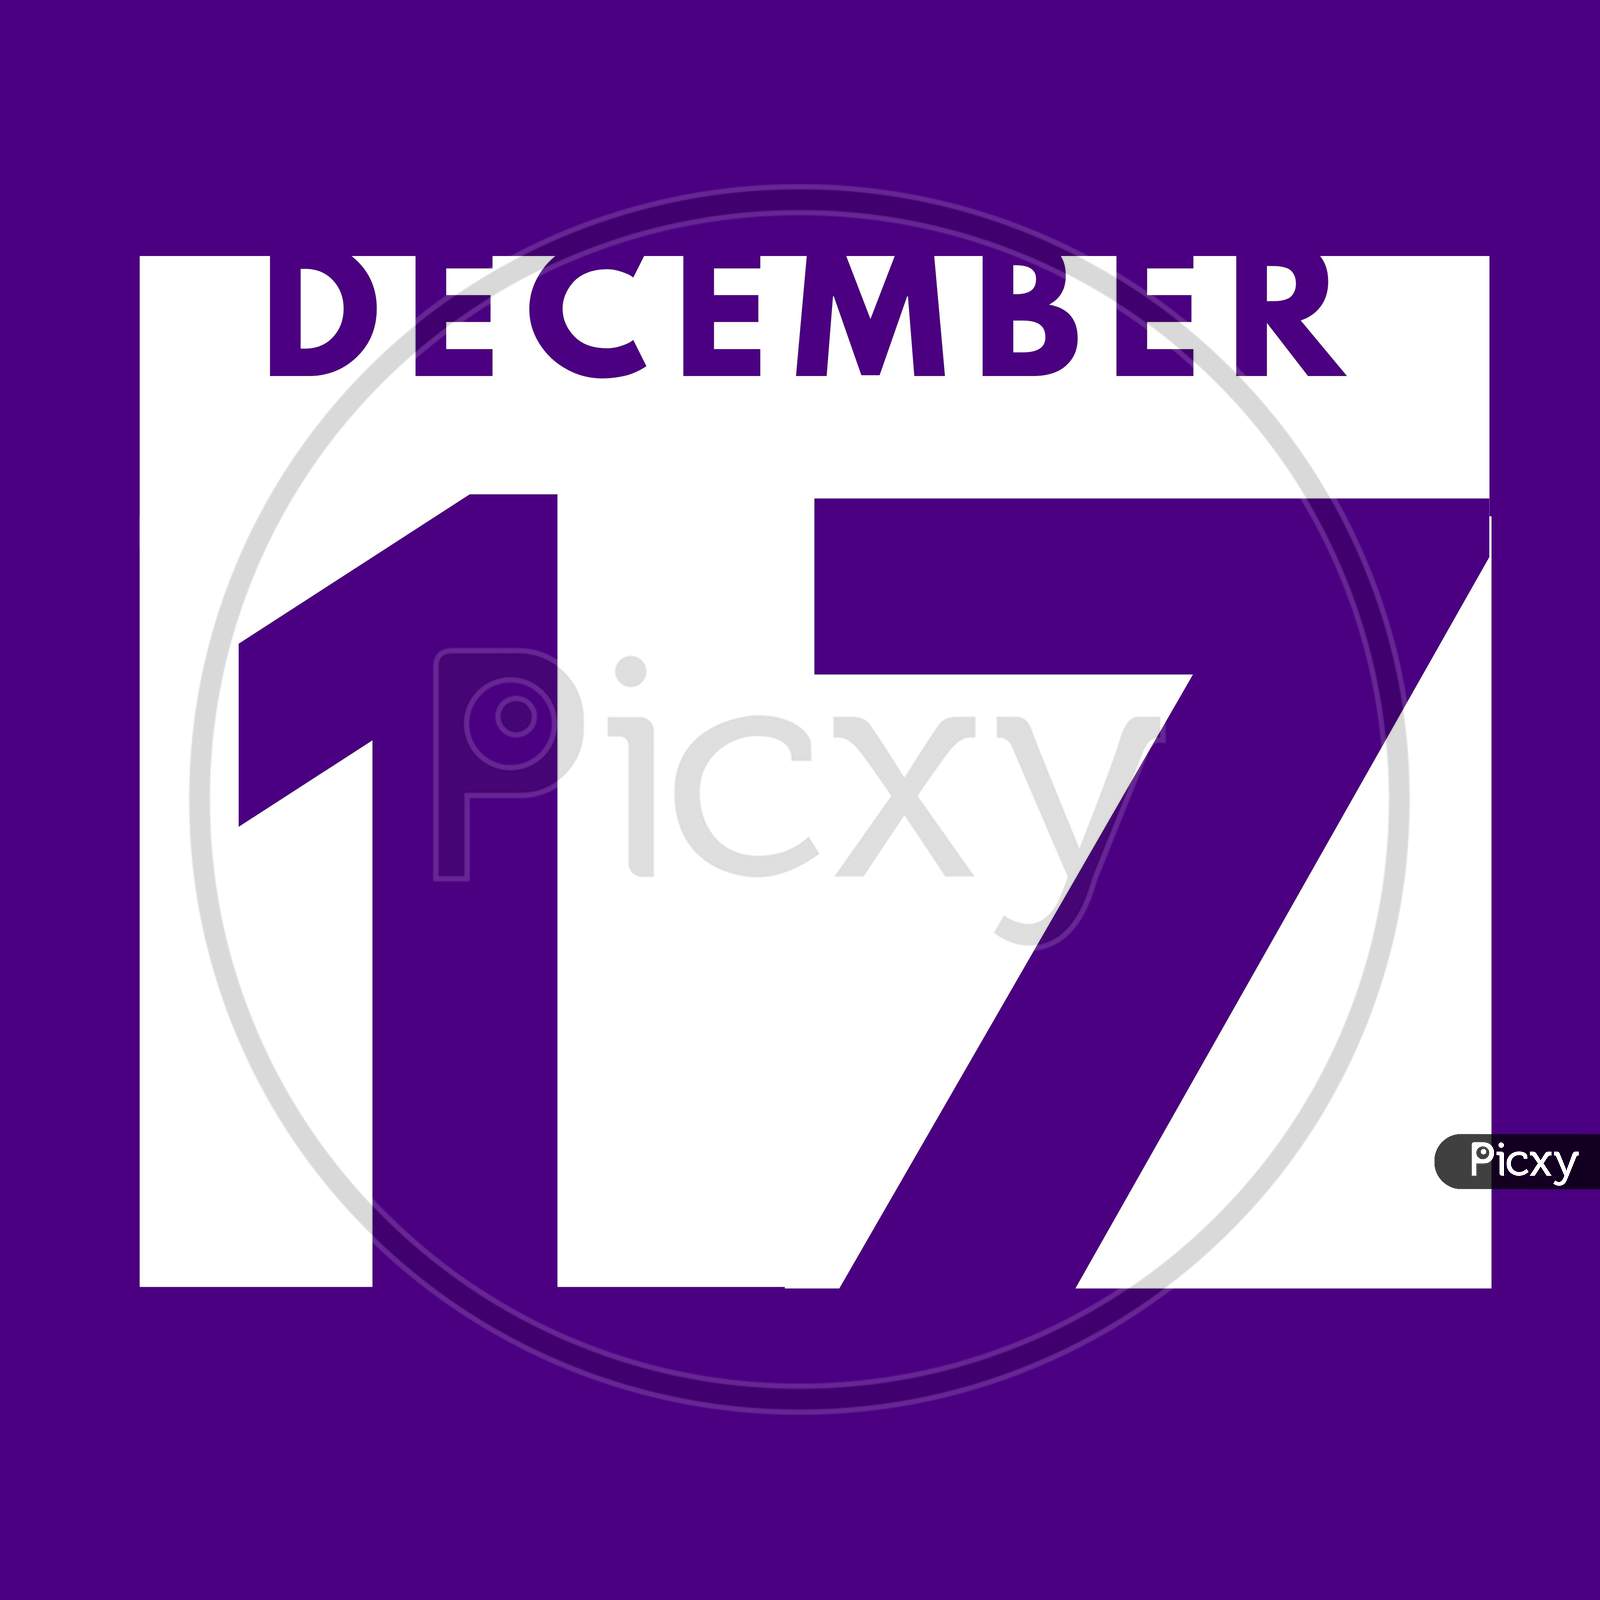 December 17 . Flat Modern Daily Calendar Icon .Date ,Day, Month .Calendar For The Month Of December